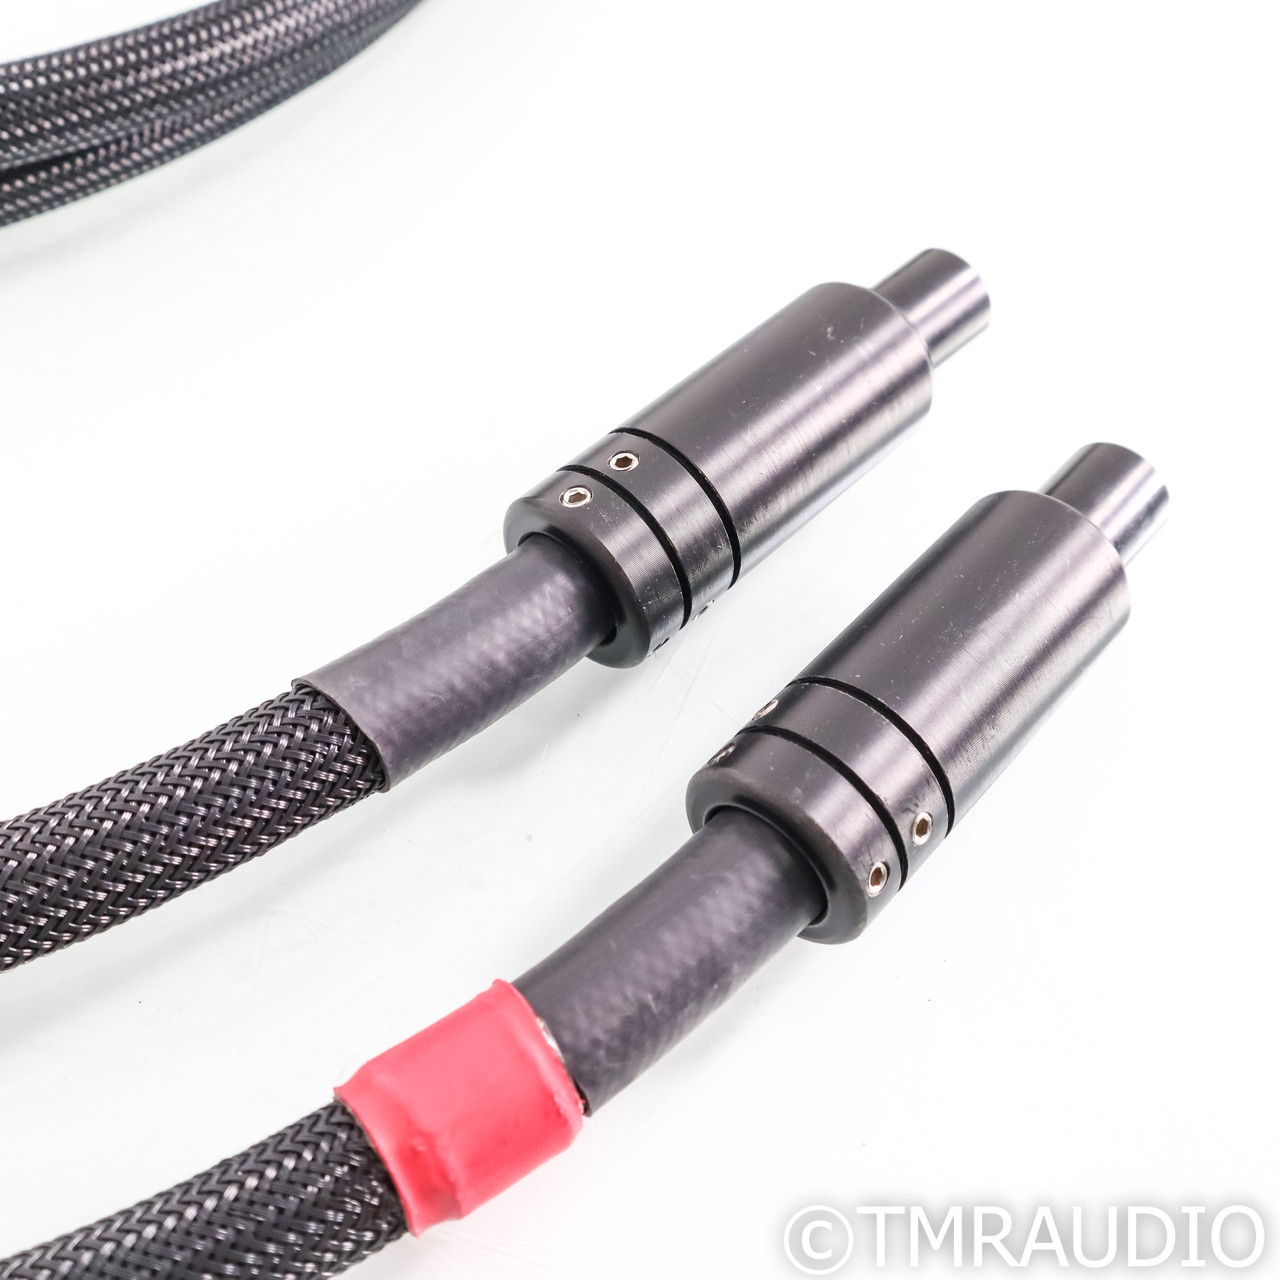 Cable Research Lab Bronze XLR Cables; 2m Pair Balanced ... 9